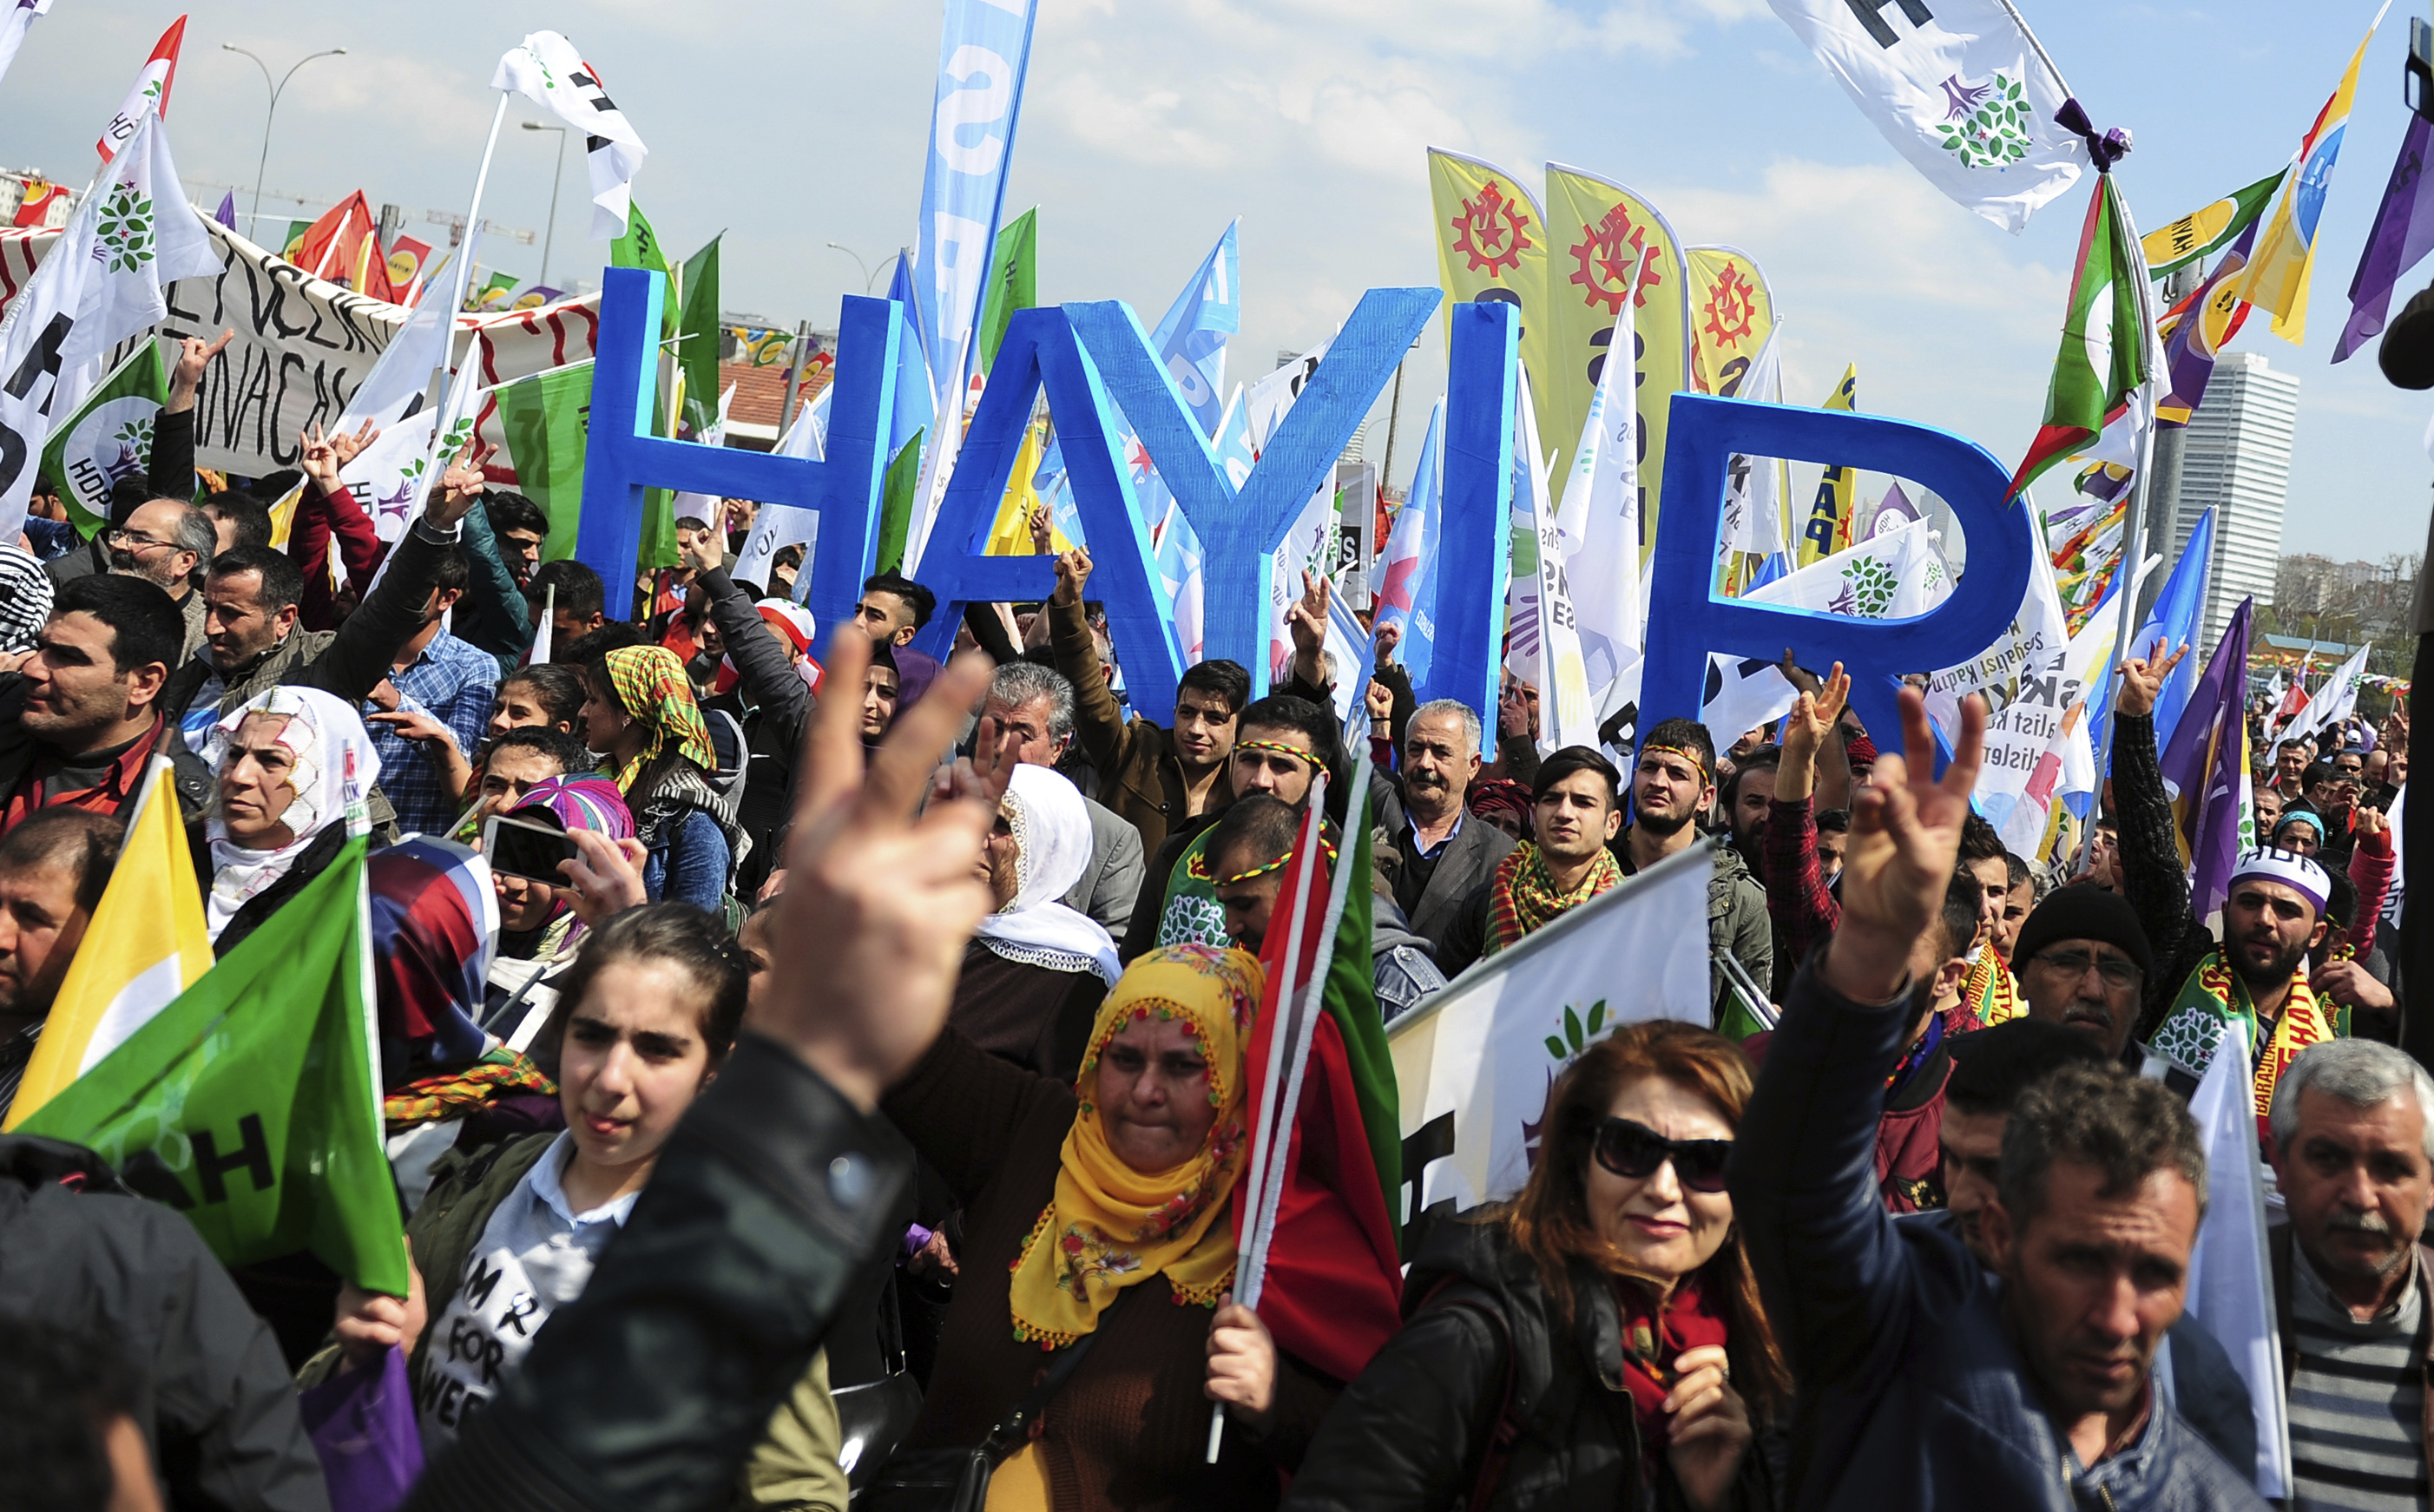 Supporters of pro-Kurdish Peoples' Democracy Party hold placards that read 